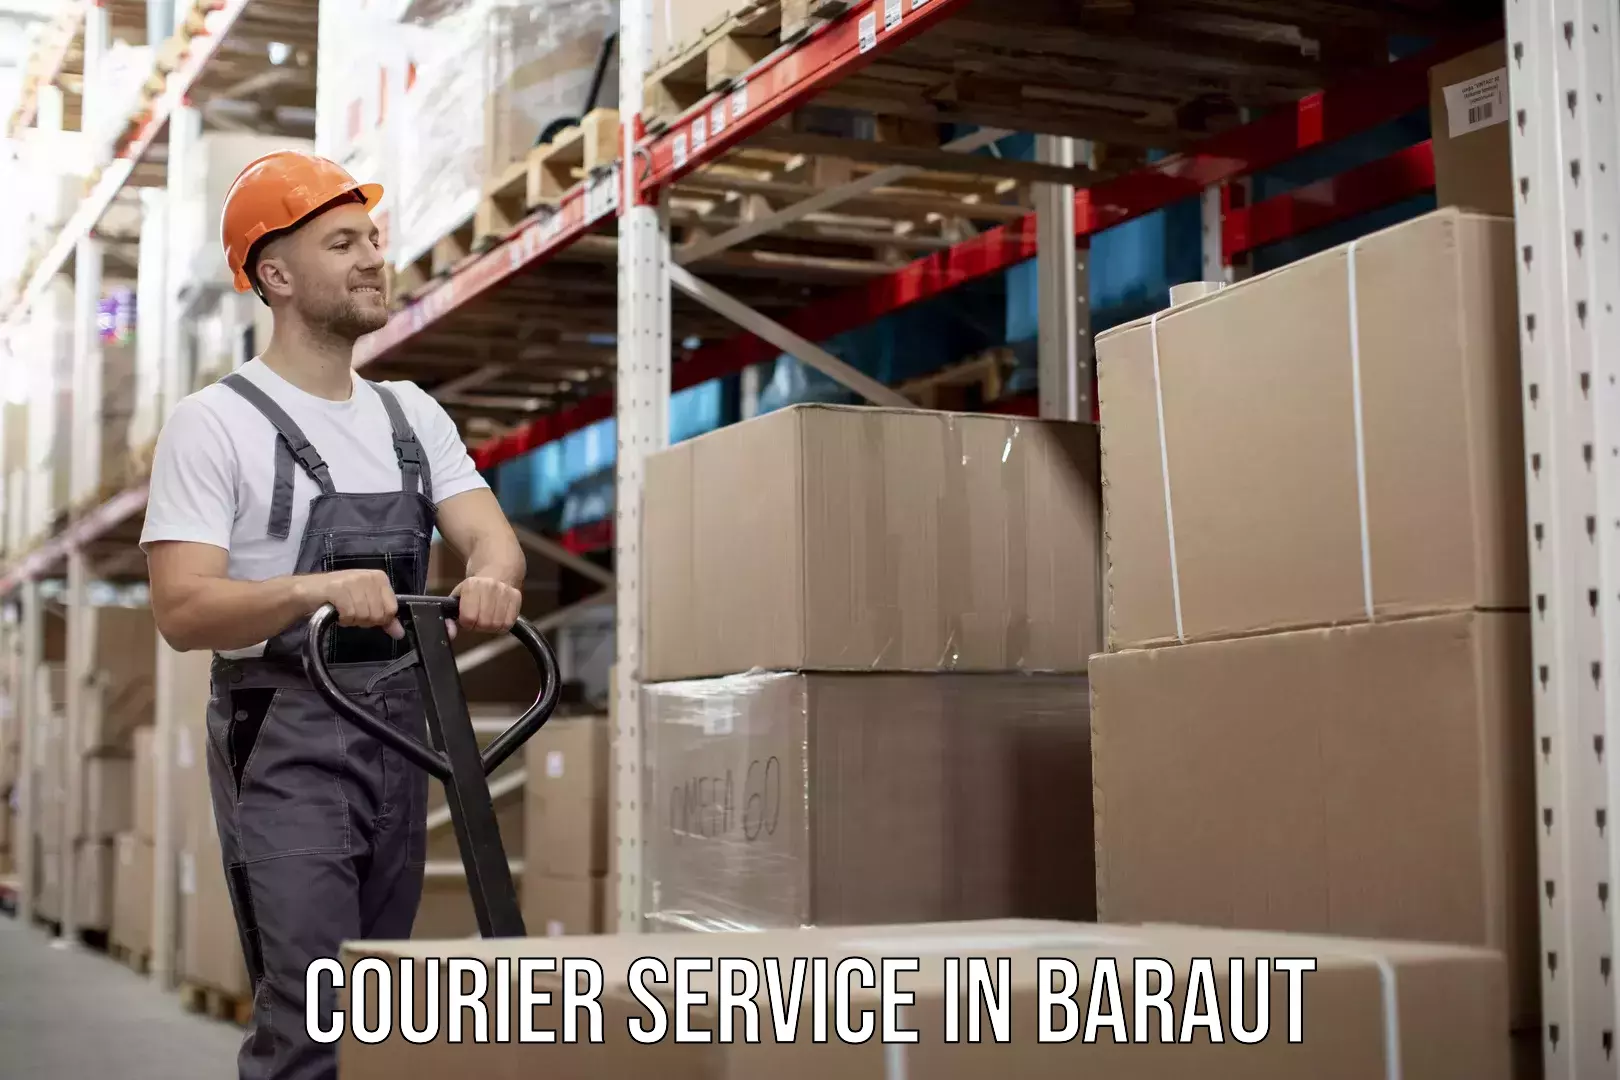 Sustainable courier practices in Baraut